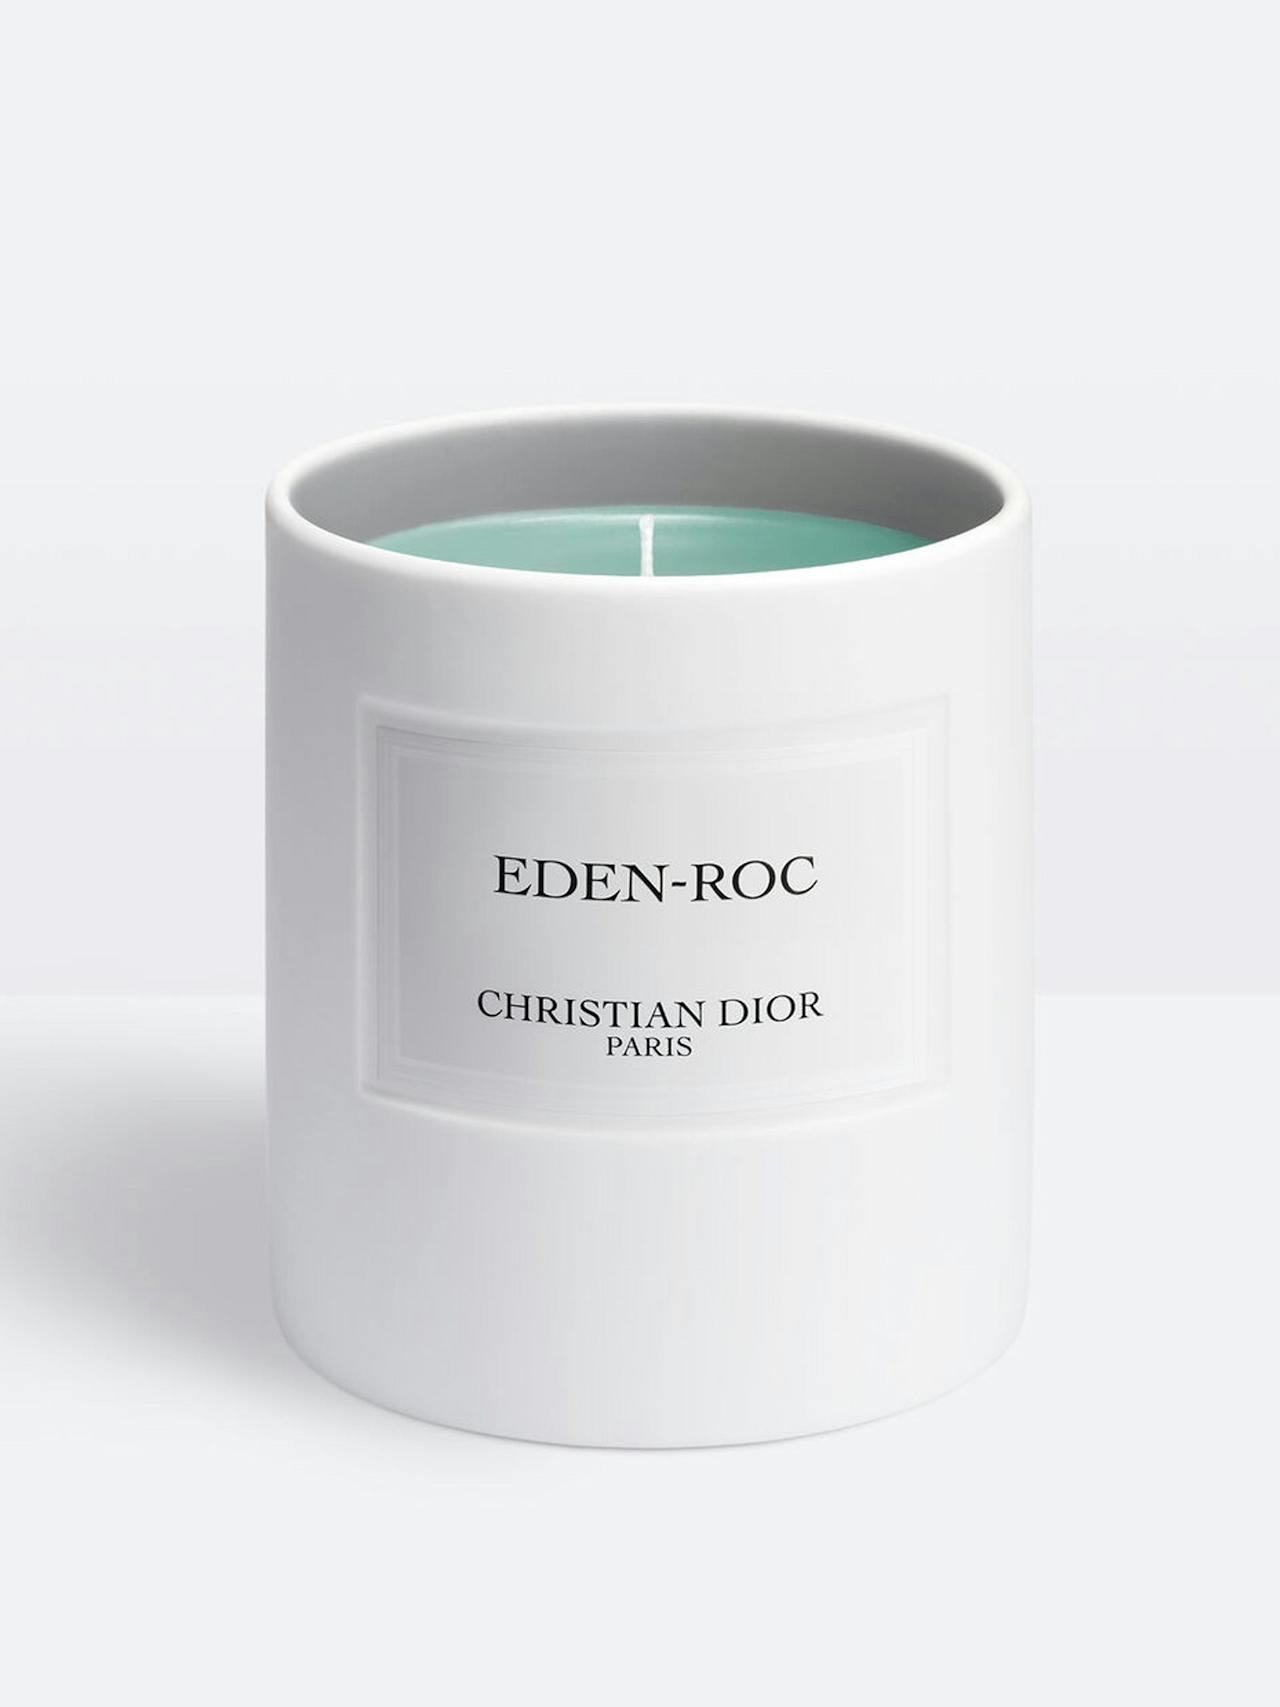 Eden-roc scented candle